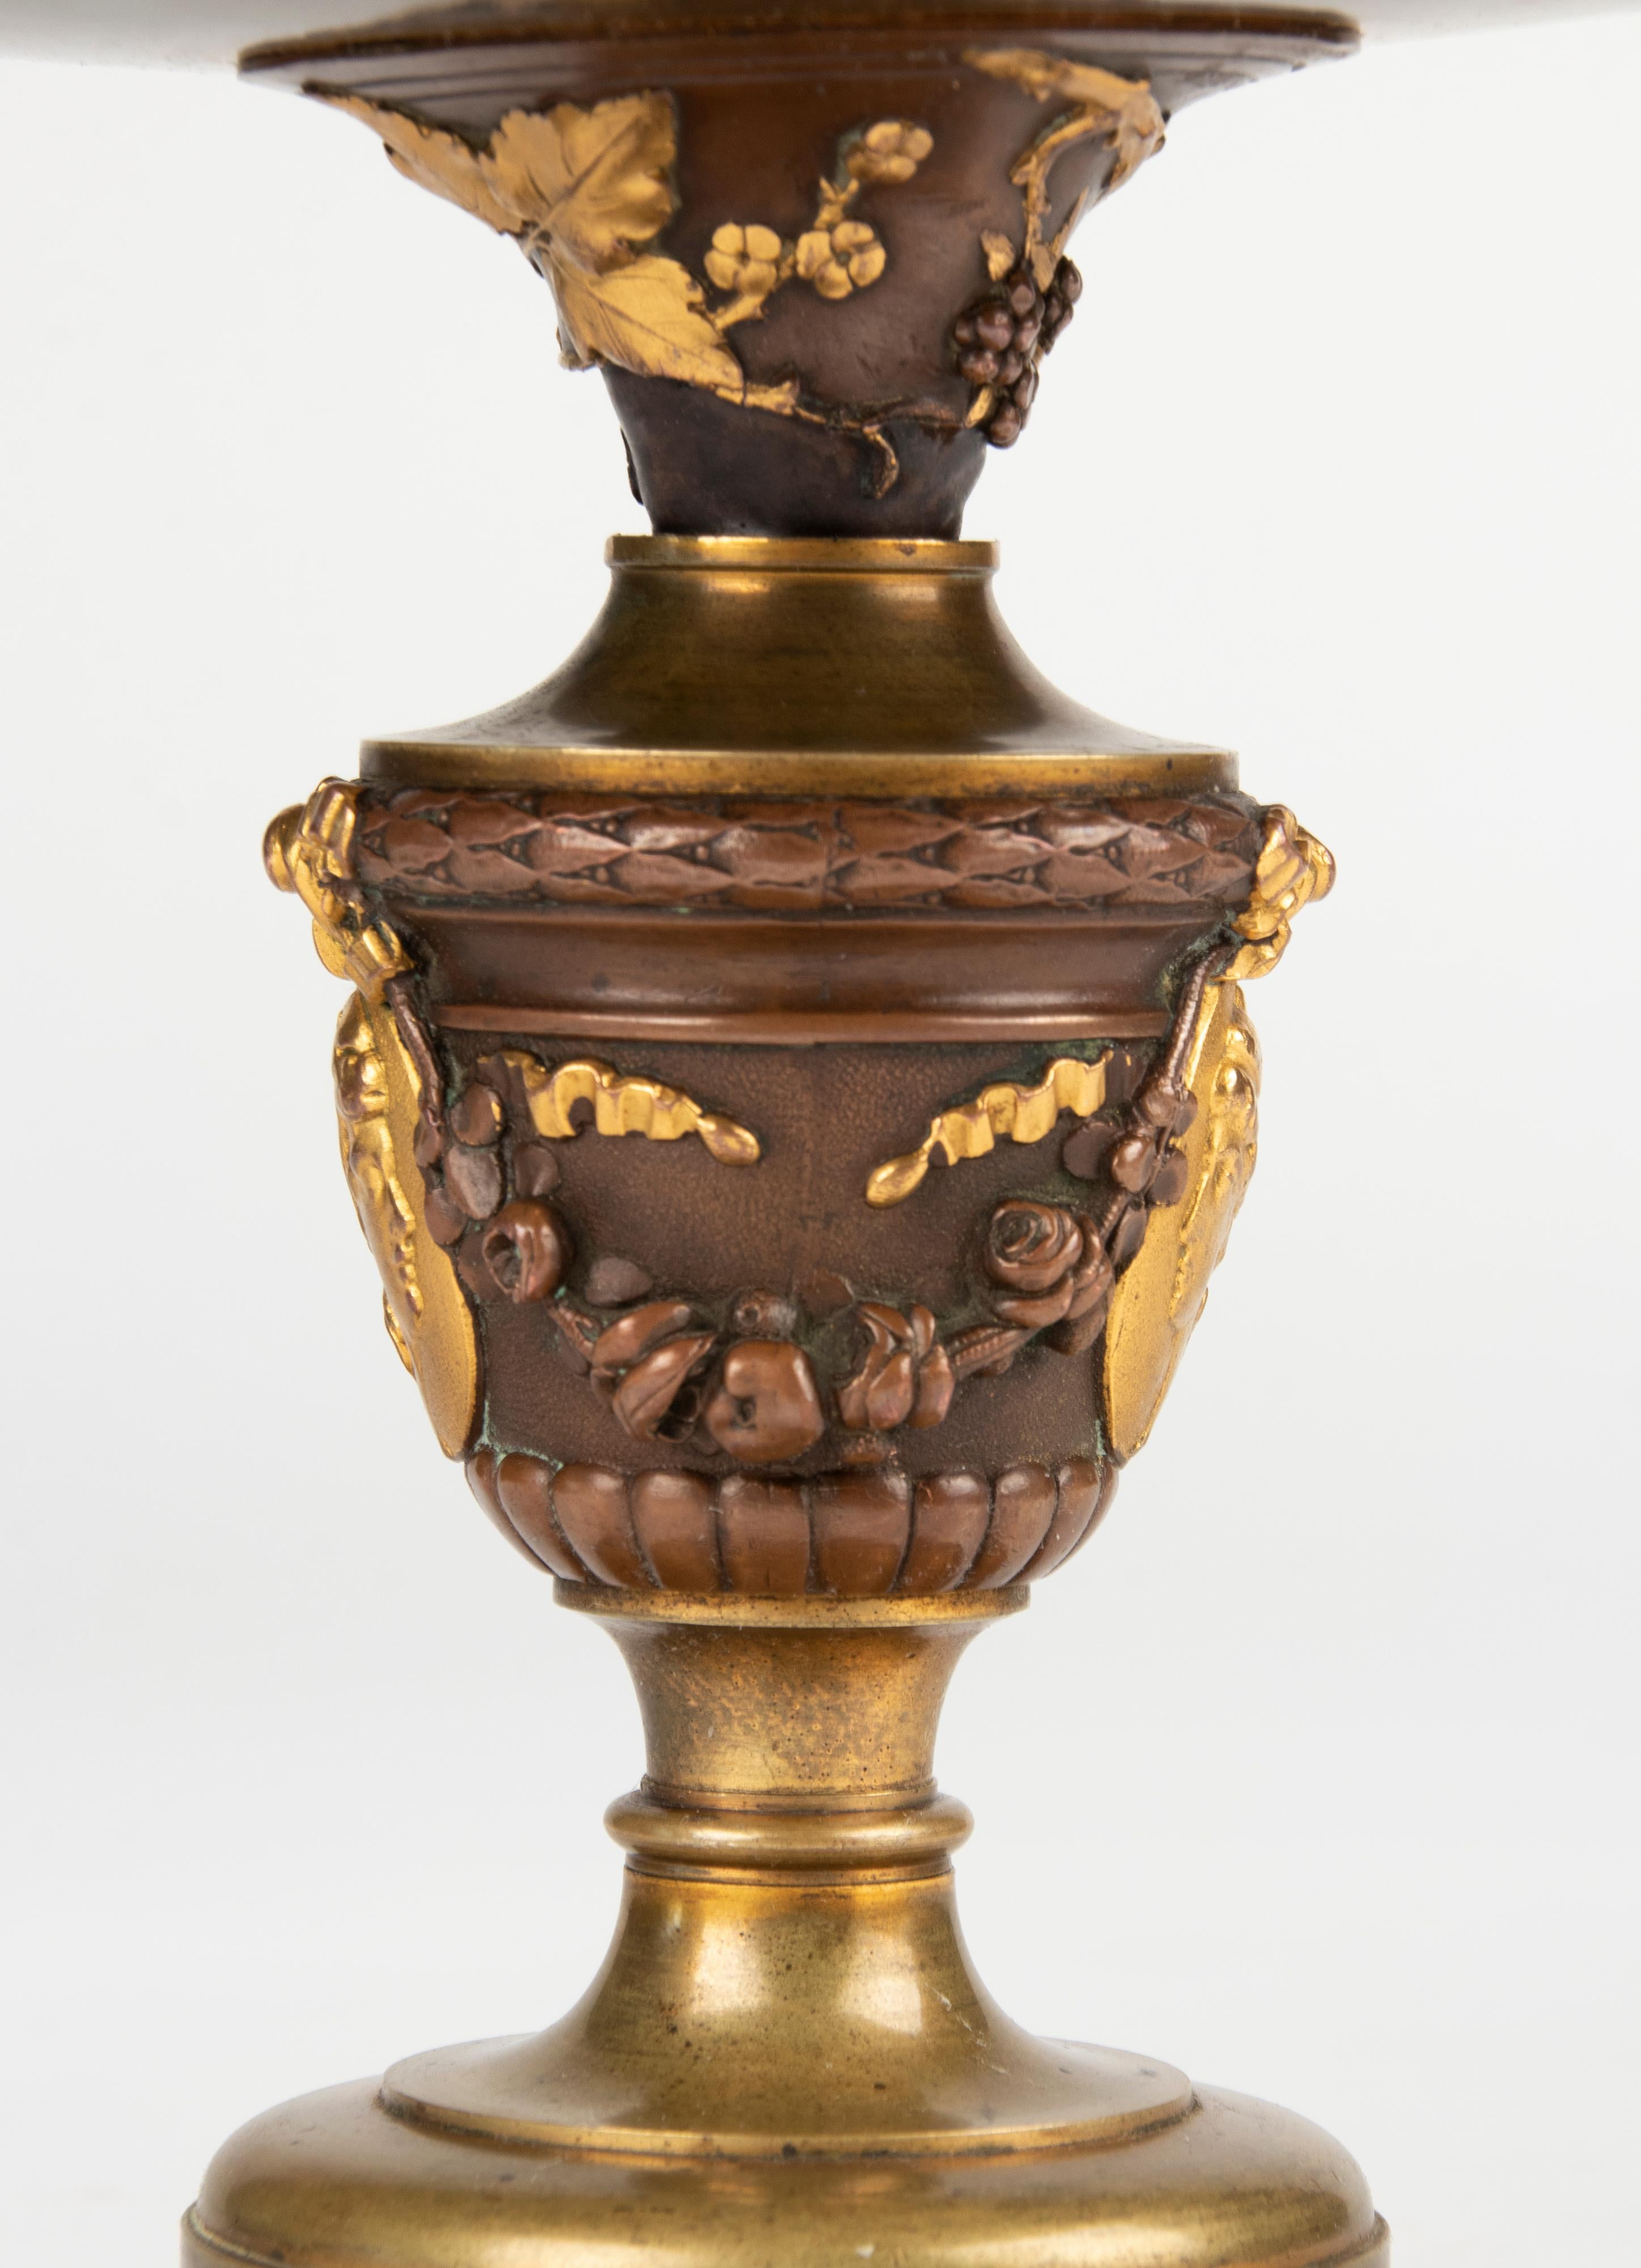 Beautiful antique bronze tazza, a bowl on a high foot. The bowl is decorated with graceful flowers and dates from the late 19th century. Multicolored patina.
The bowl is signed Oudry, a well-known French designer of bronze statues and ornamental